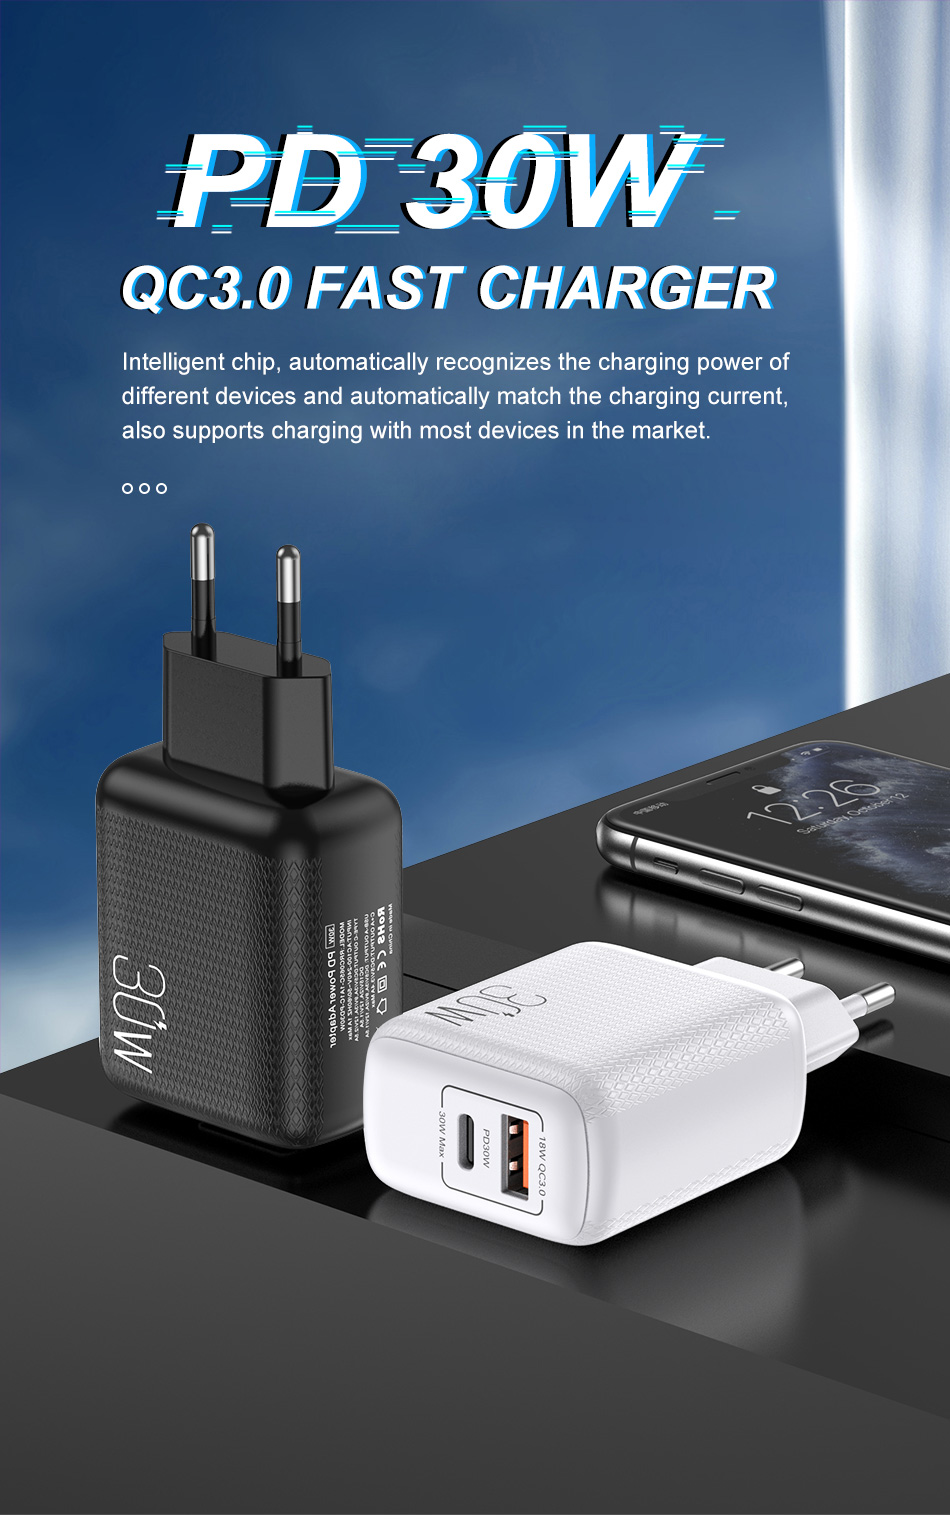 USLION-30W-USB-C-PDQC30-2-Port-Fast-Charging-Charger-Adapter-For-iPhone-13-For-iPhone-12-Pro-Max-For-1887617-1